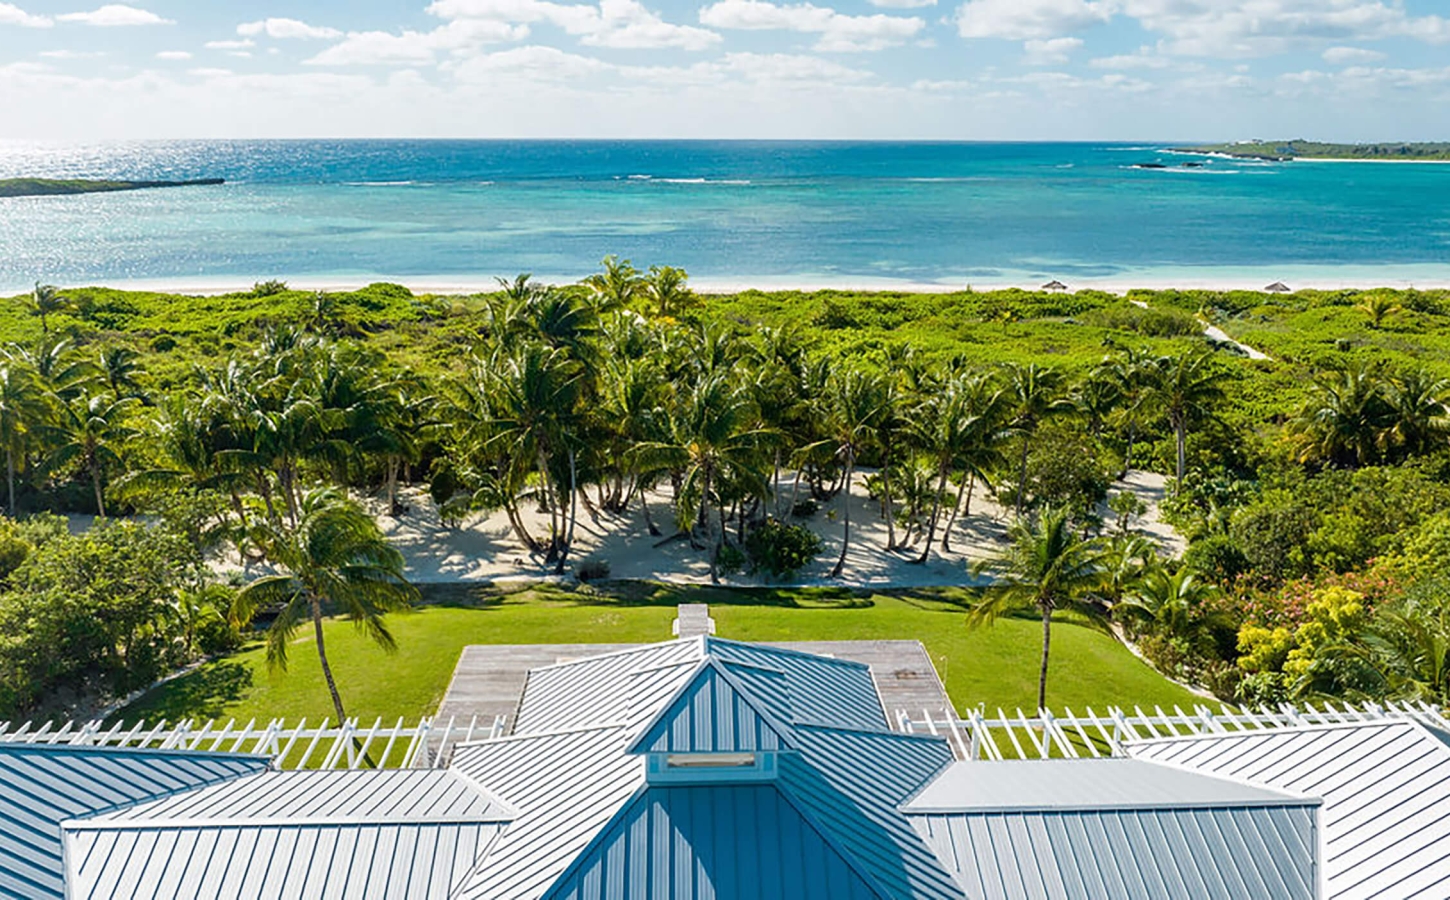 Rooftop view of a property at The Abaco Club overlooking the turquoise Bahamian sea